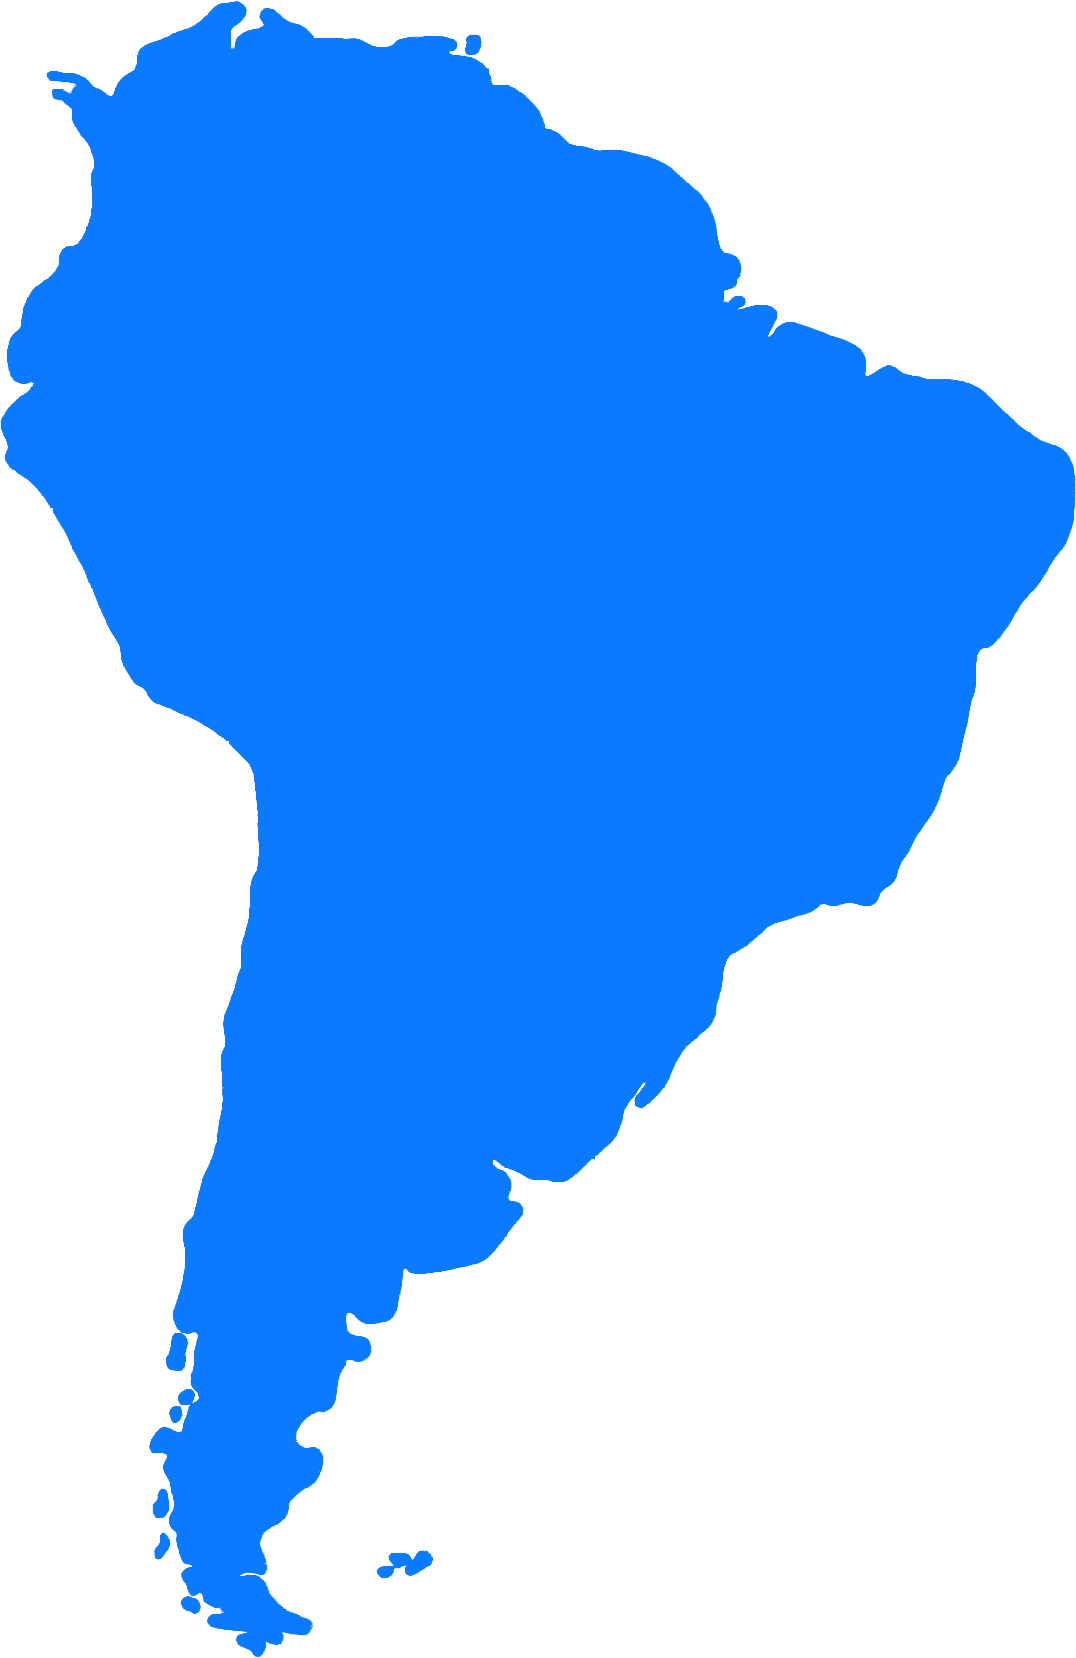 South America Blue Map Silhouette PNG image